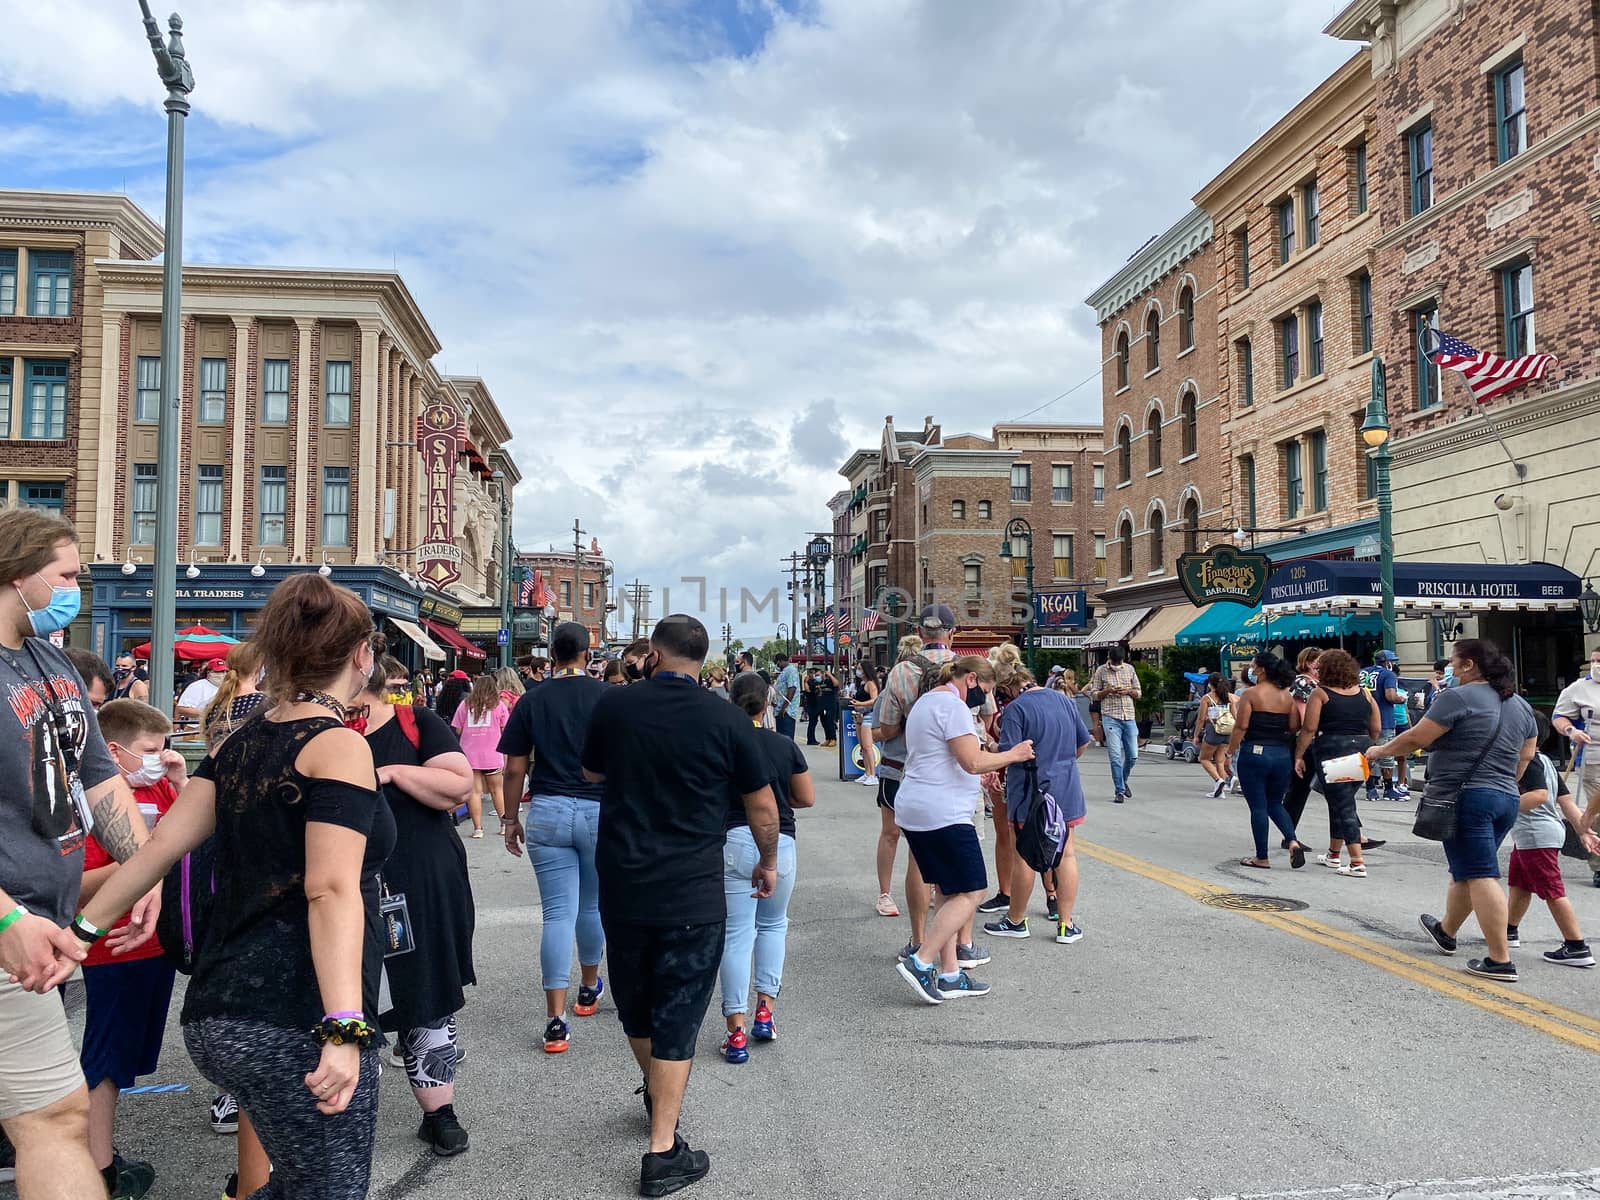 Orlando,FL/USA- 10/18/20: People walking around the busy Universal Studios  in Orlando, Florida while wearing face masks and social distancing.